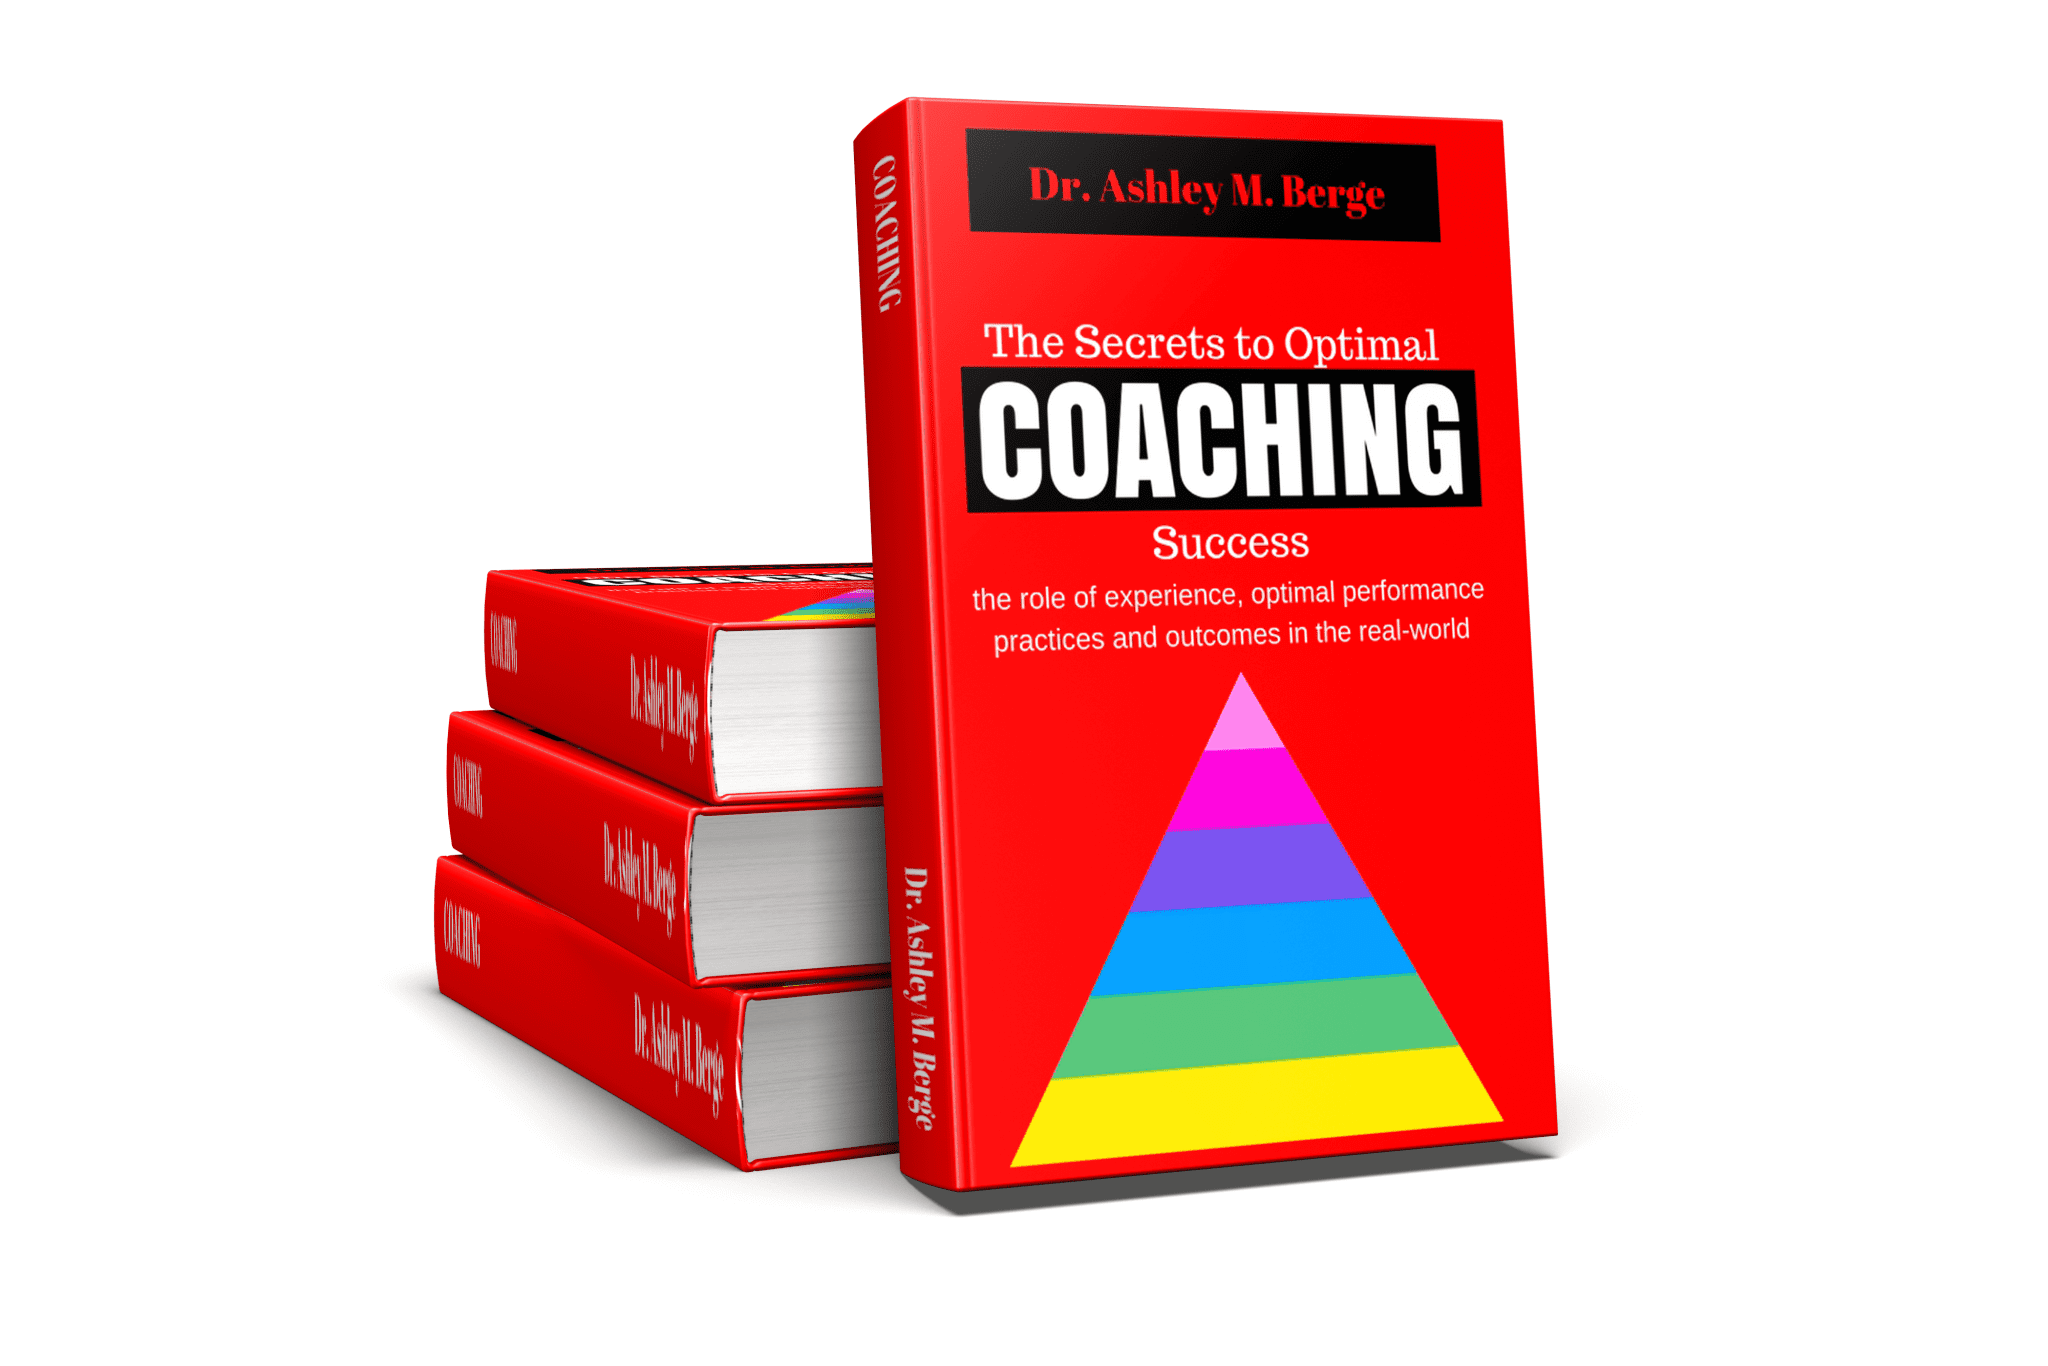 The Secrets to Optimal <a href="https://am8international.com/product/rrp-the-secrets-to-optimal-coaching-success-download-only/" data-type="product" data-id="17587" rel="nofollow">Coaching Success</a>